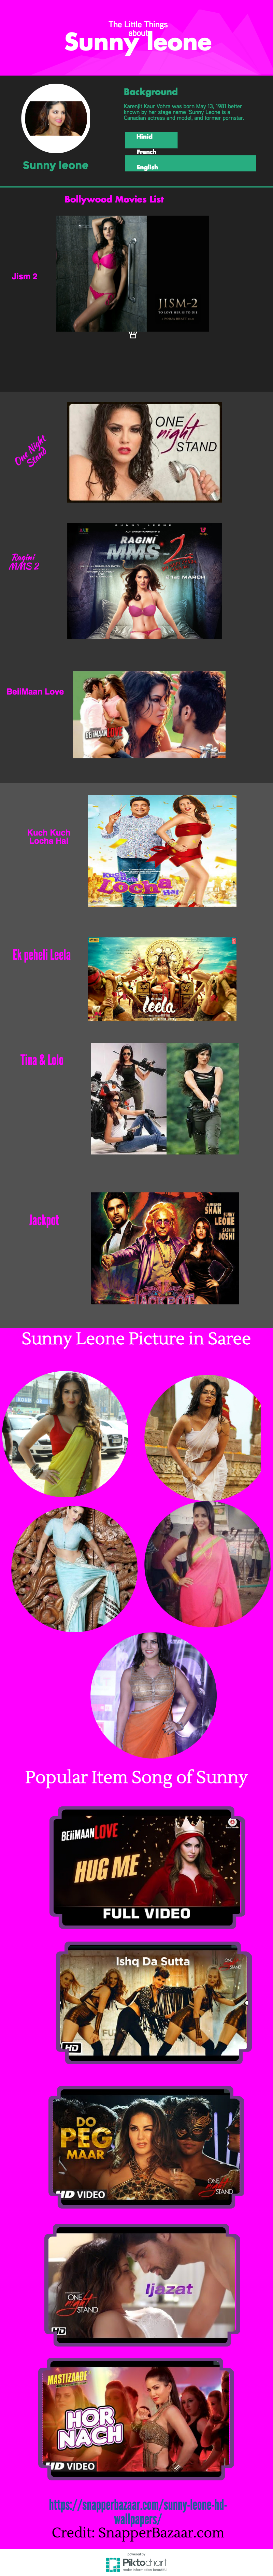 sunny-leone-first-infographic-by-snapperbazaar-com